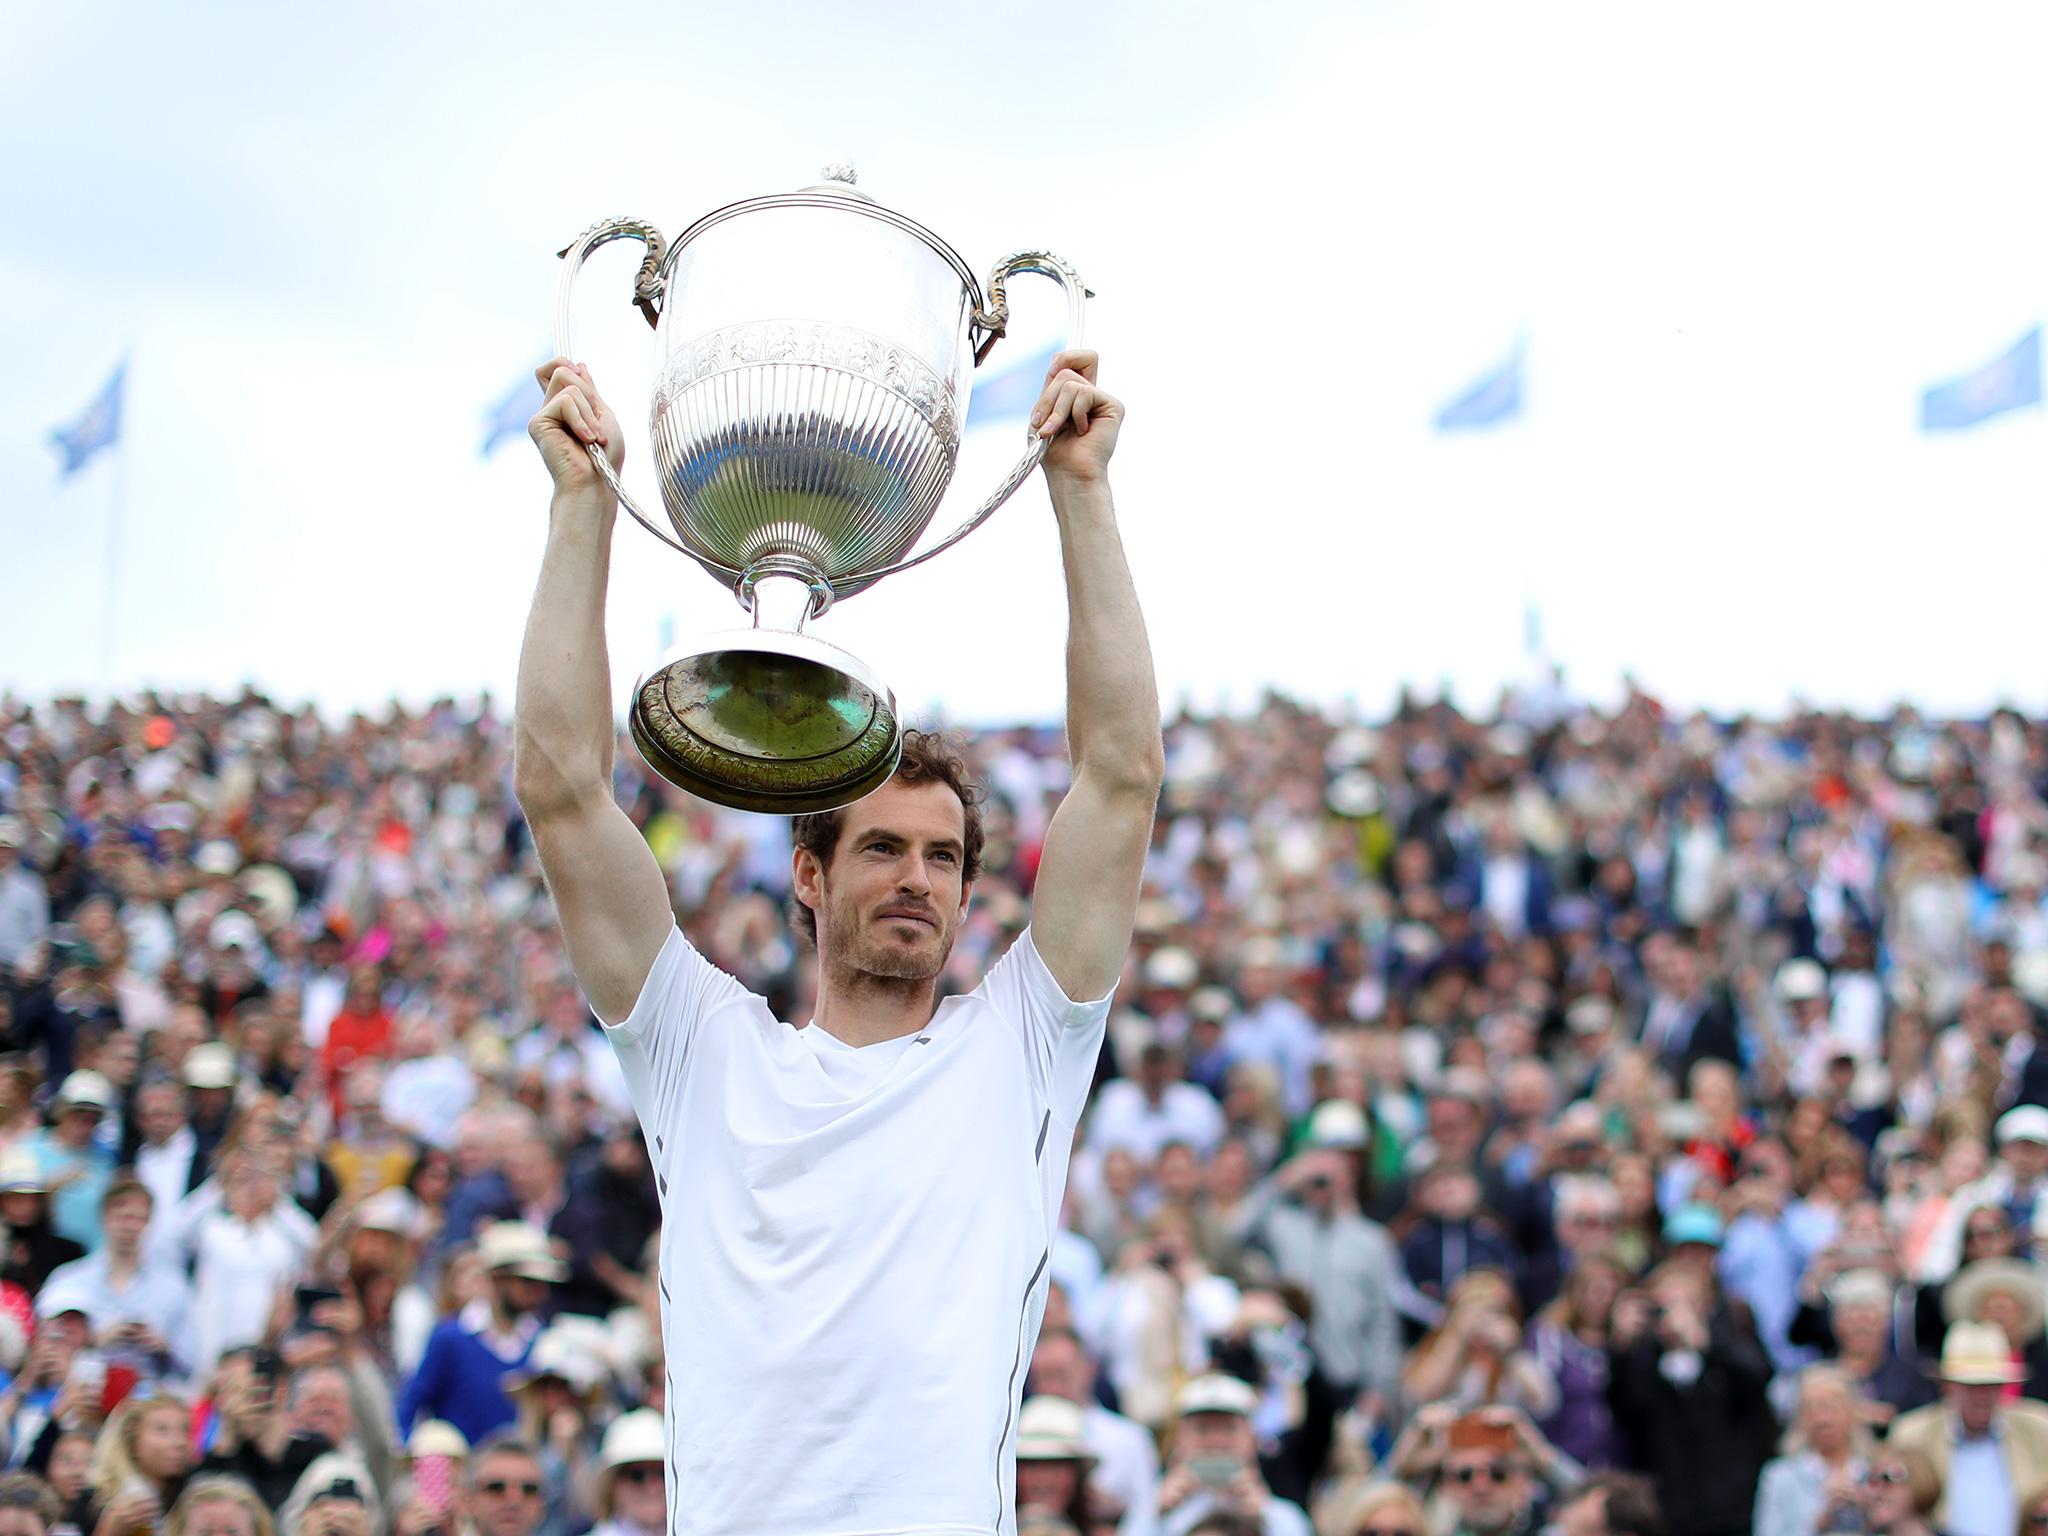 &#13;
Murray lifts the Aegon Championships trophy after beating Canada's Raonic &#13;